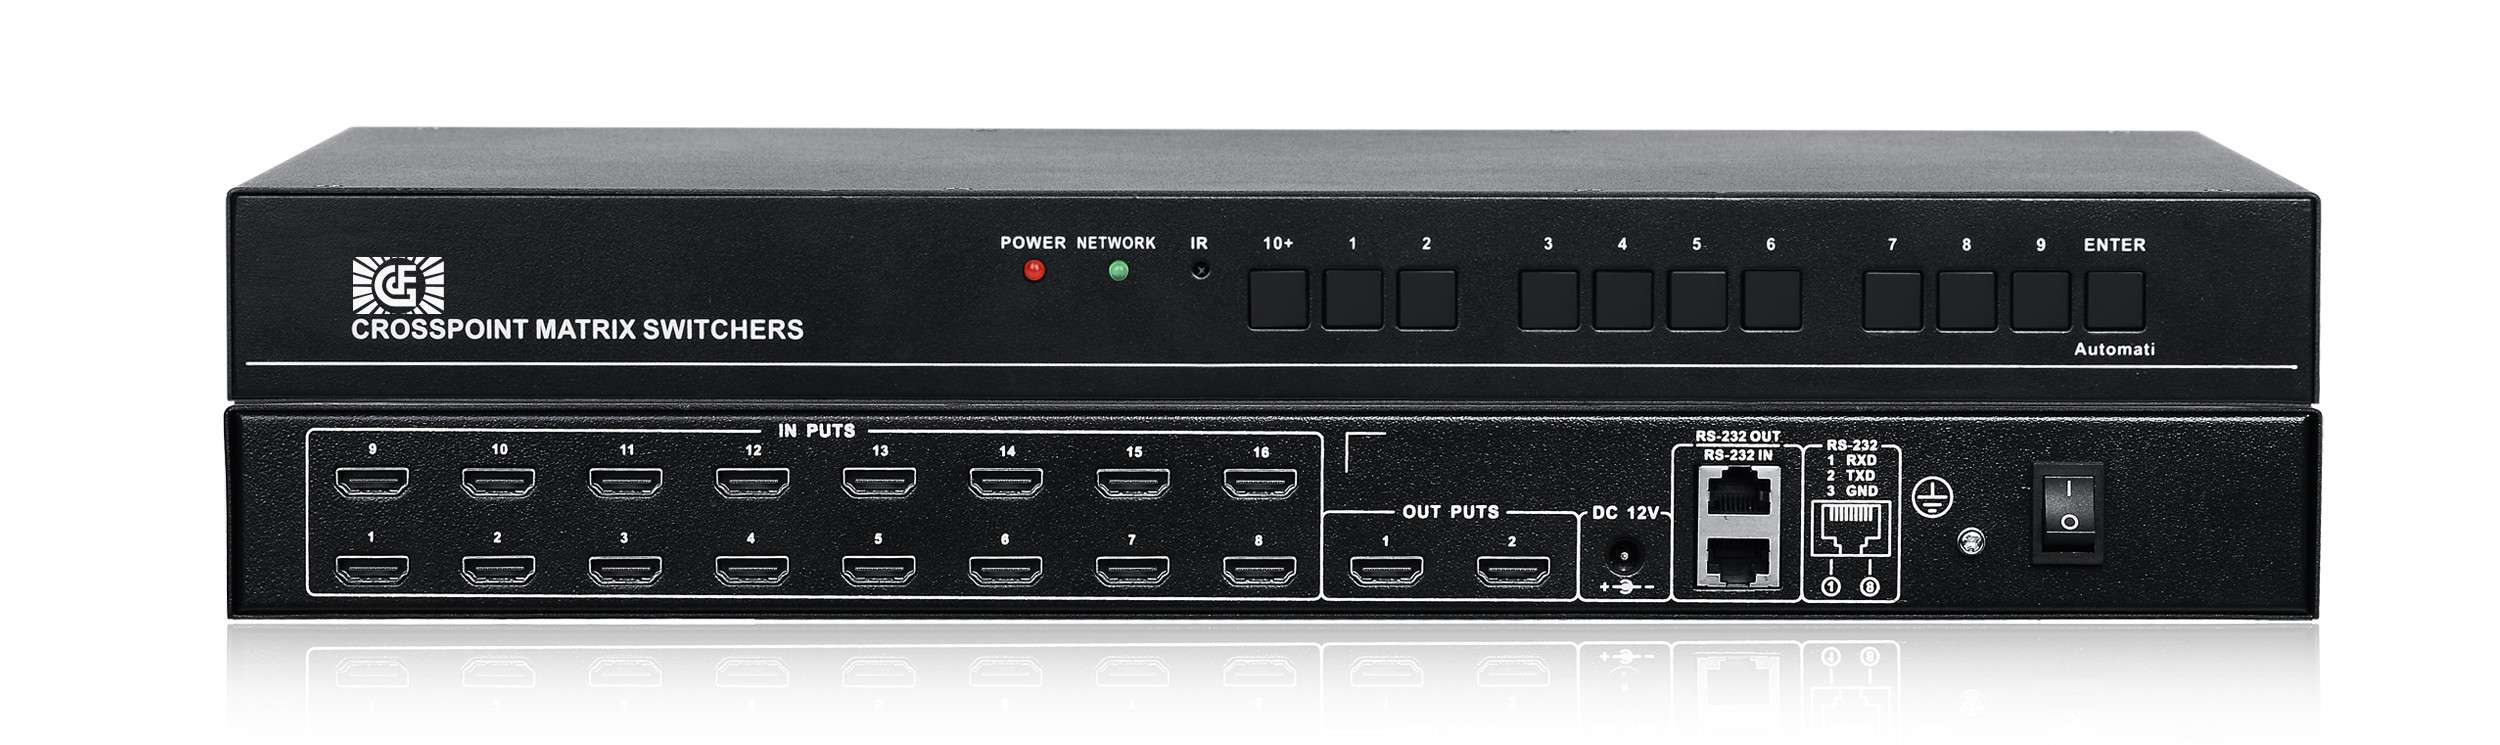 HDMI16 in, 8 in, 2 channels synchronous output aut